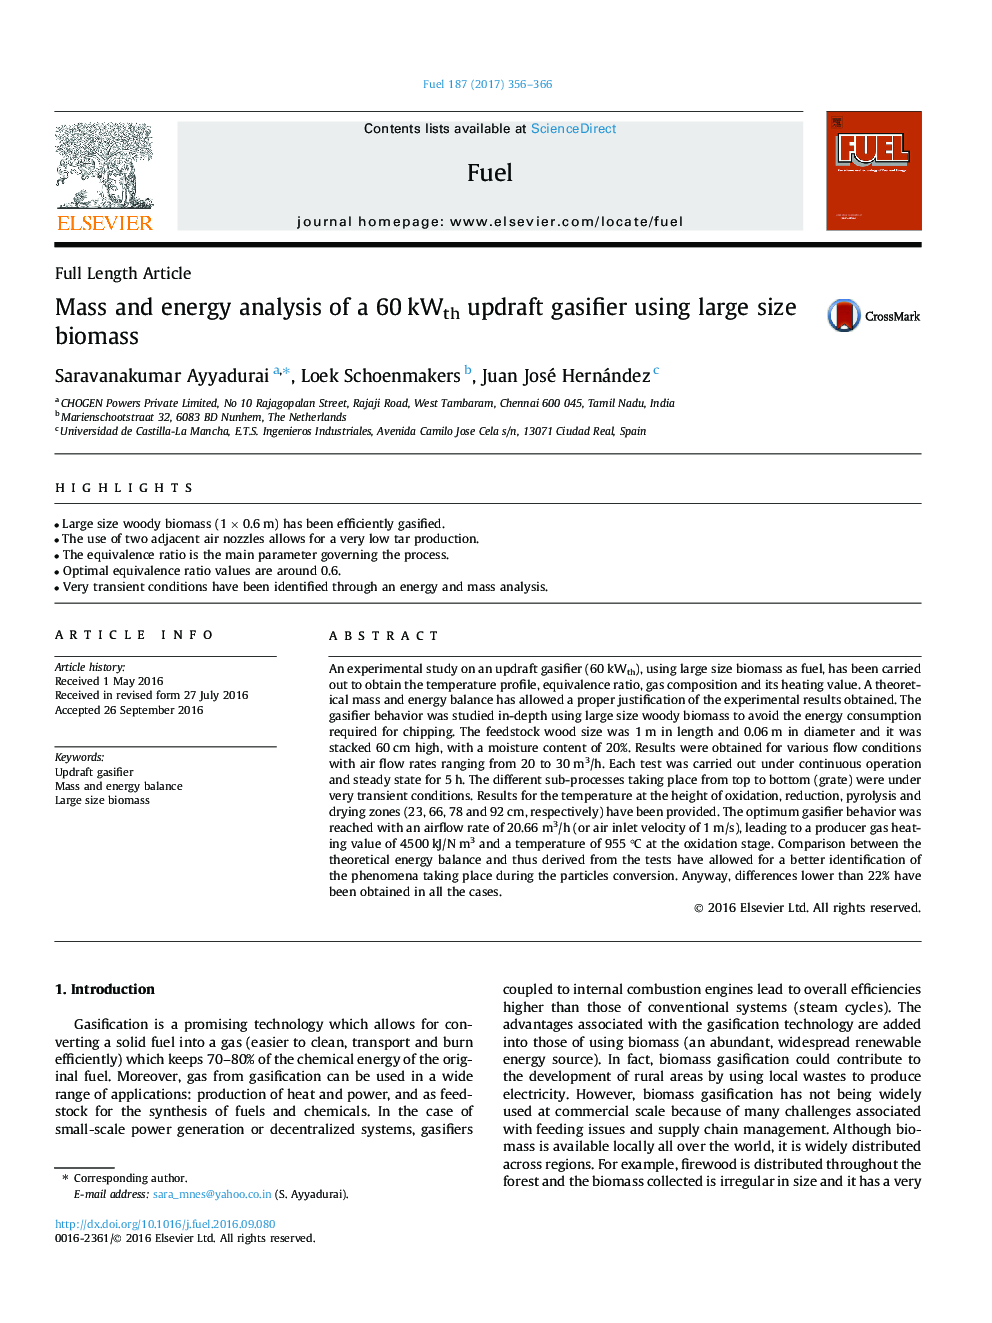 Mass and energy analysis of a 60Â kWth updraft gasifier using large size biomass